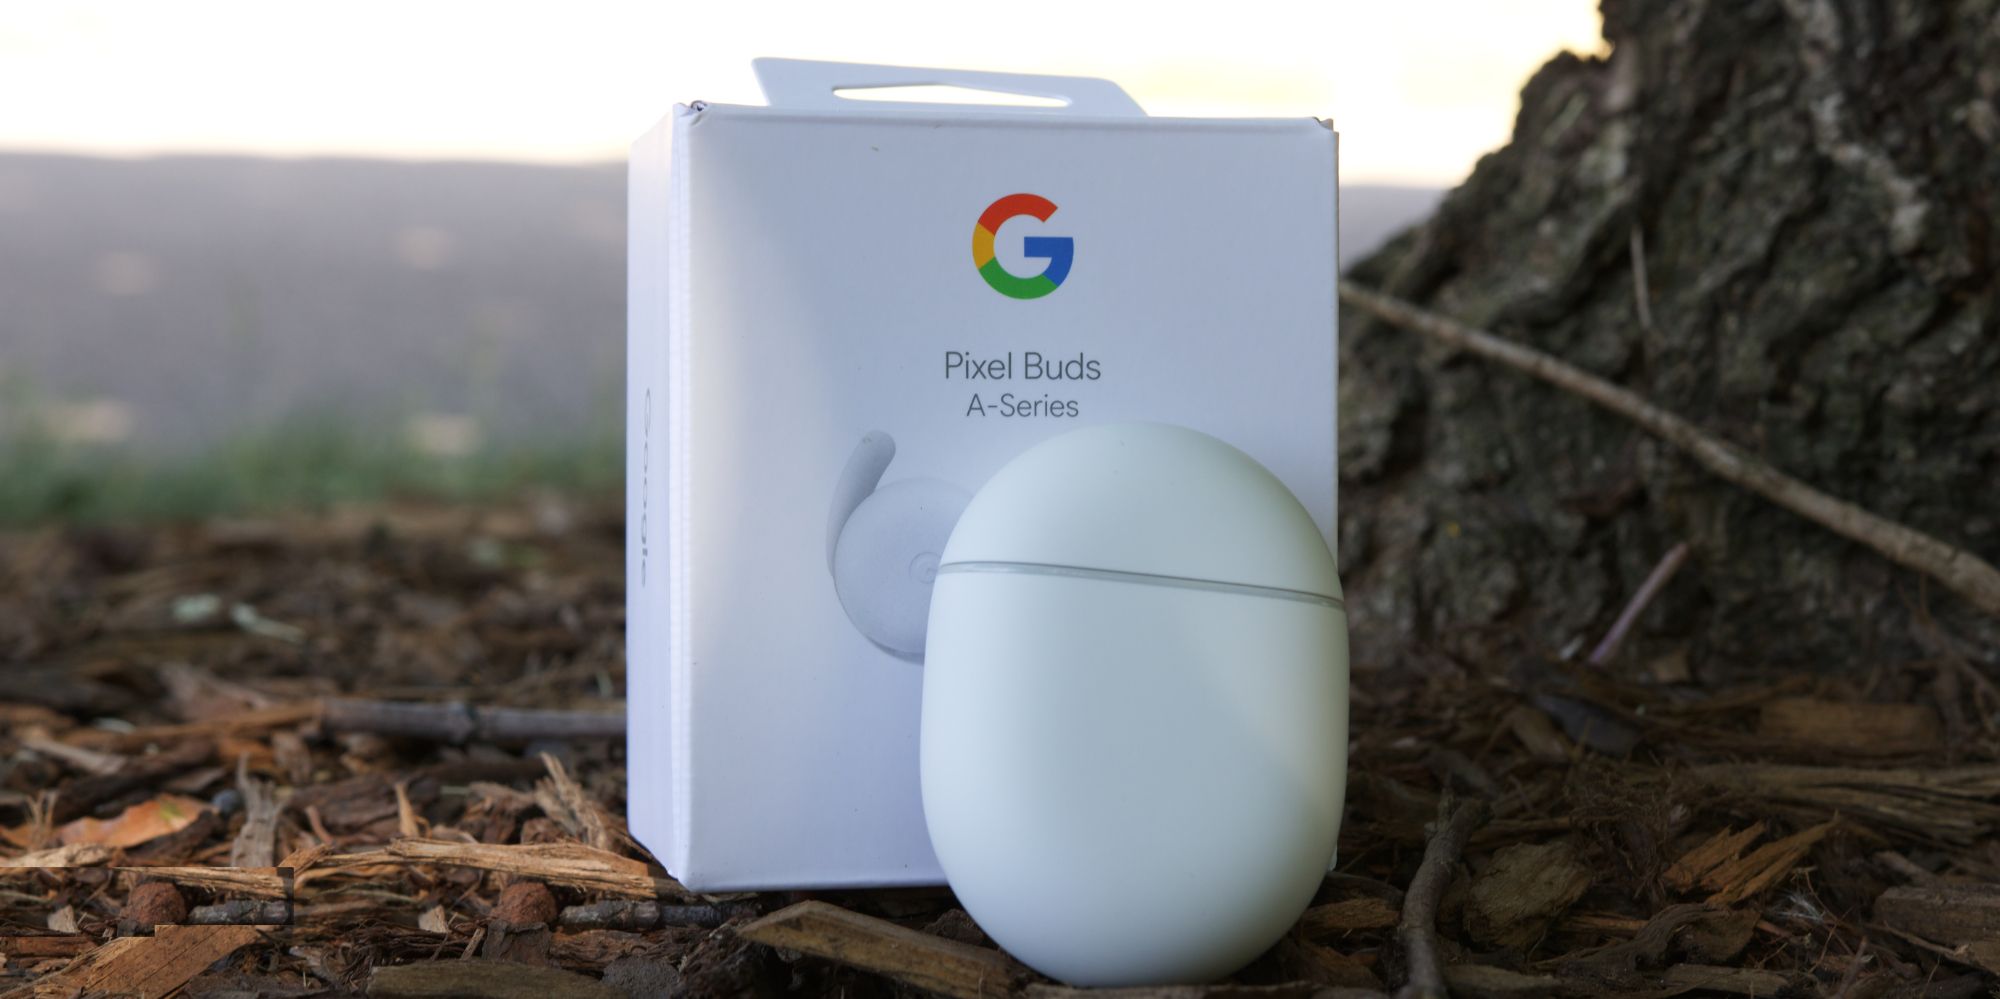 Google Pixel Buds A-Series charging case and retail box